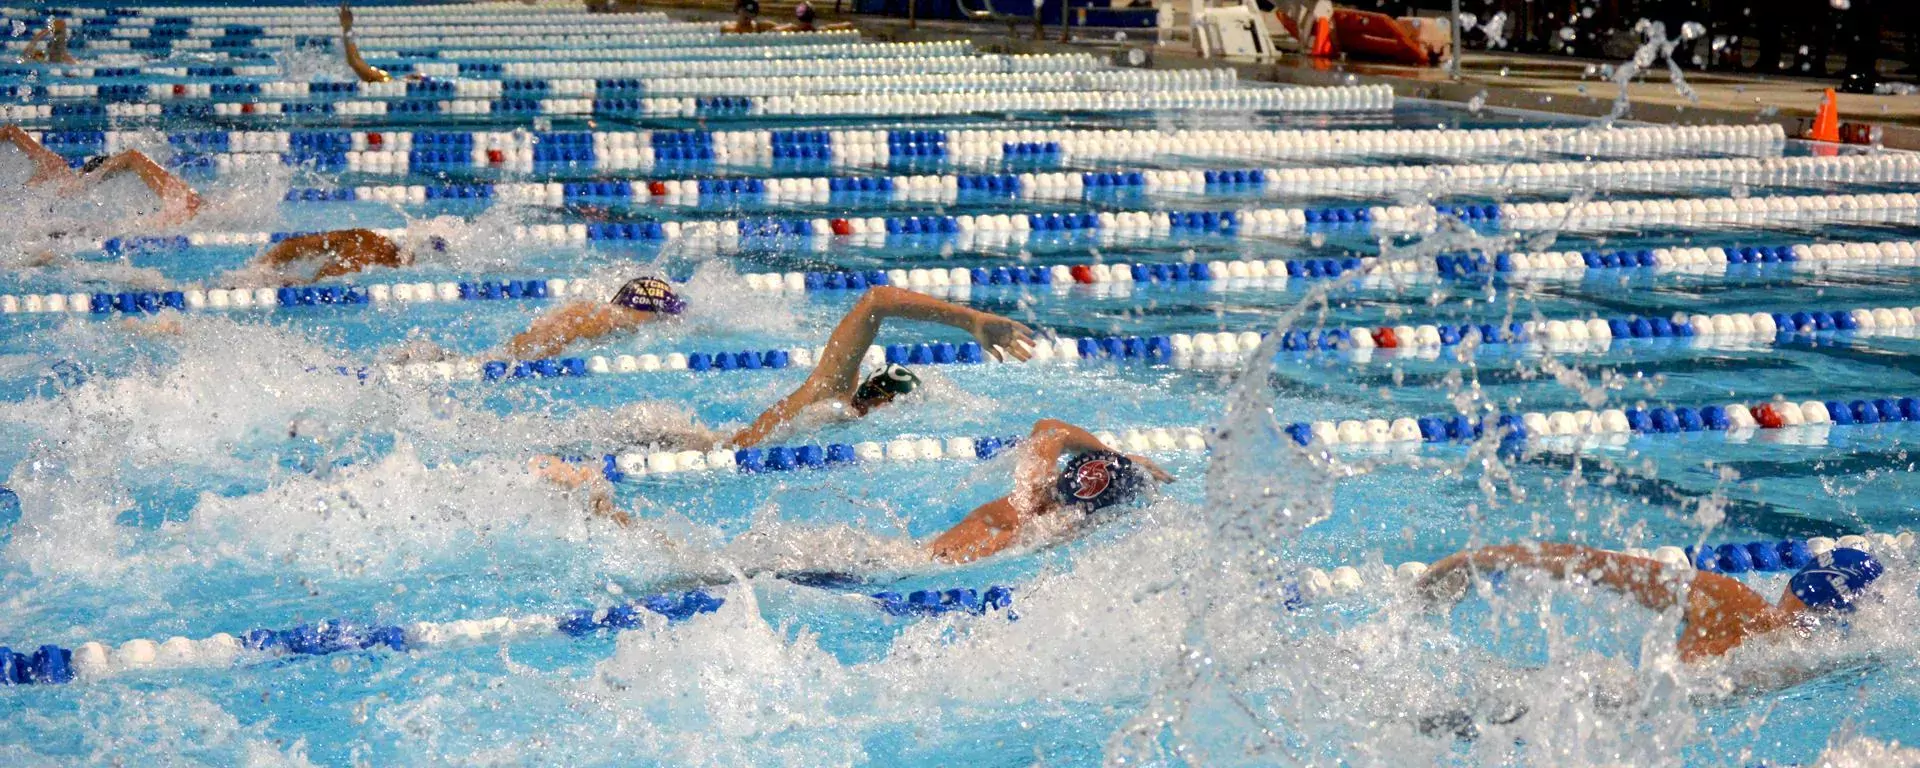 Competitive swimmers in a pool